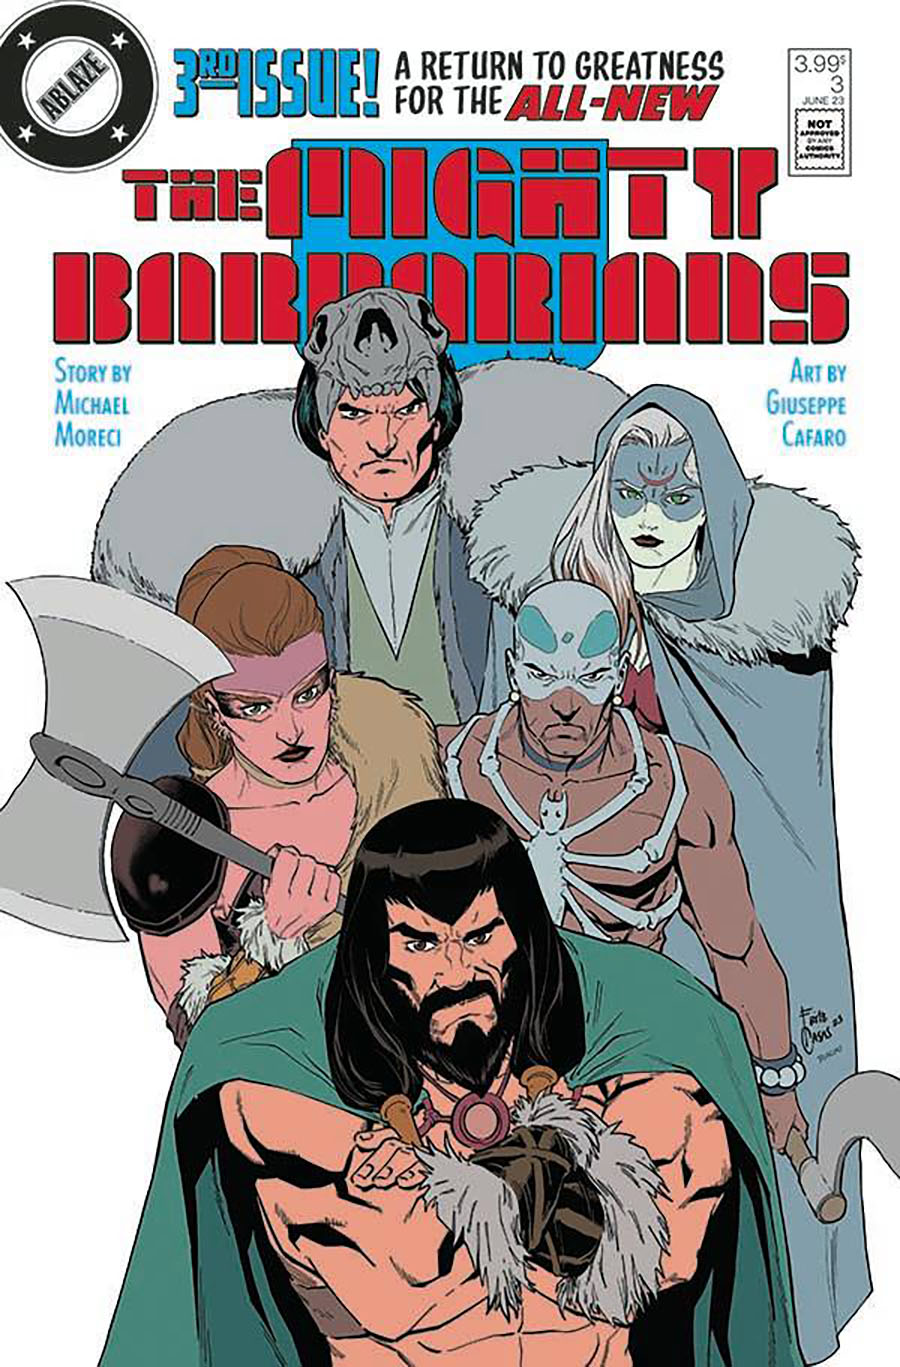 Mighty Barbarians #3 Cover D Variant Fritz Casas Justice League 1 Parody Cover